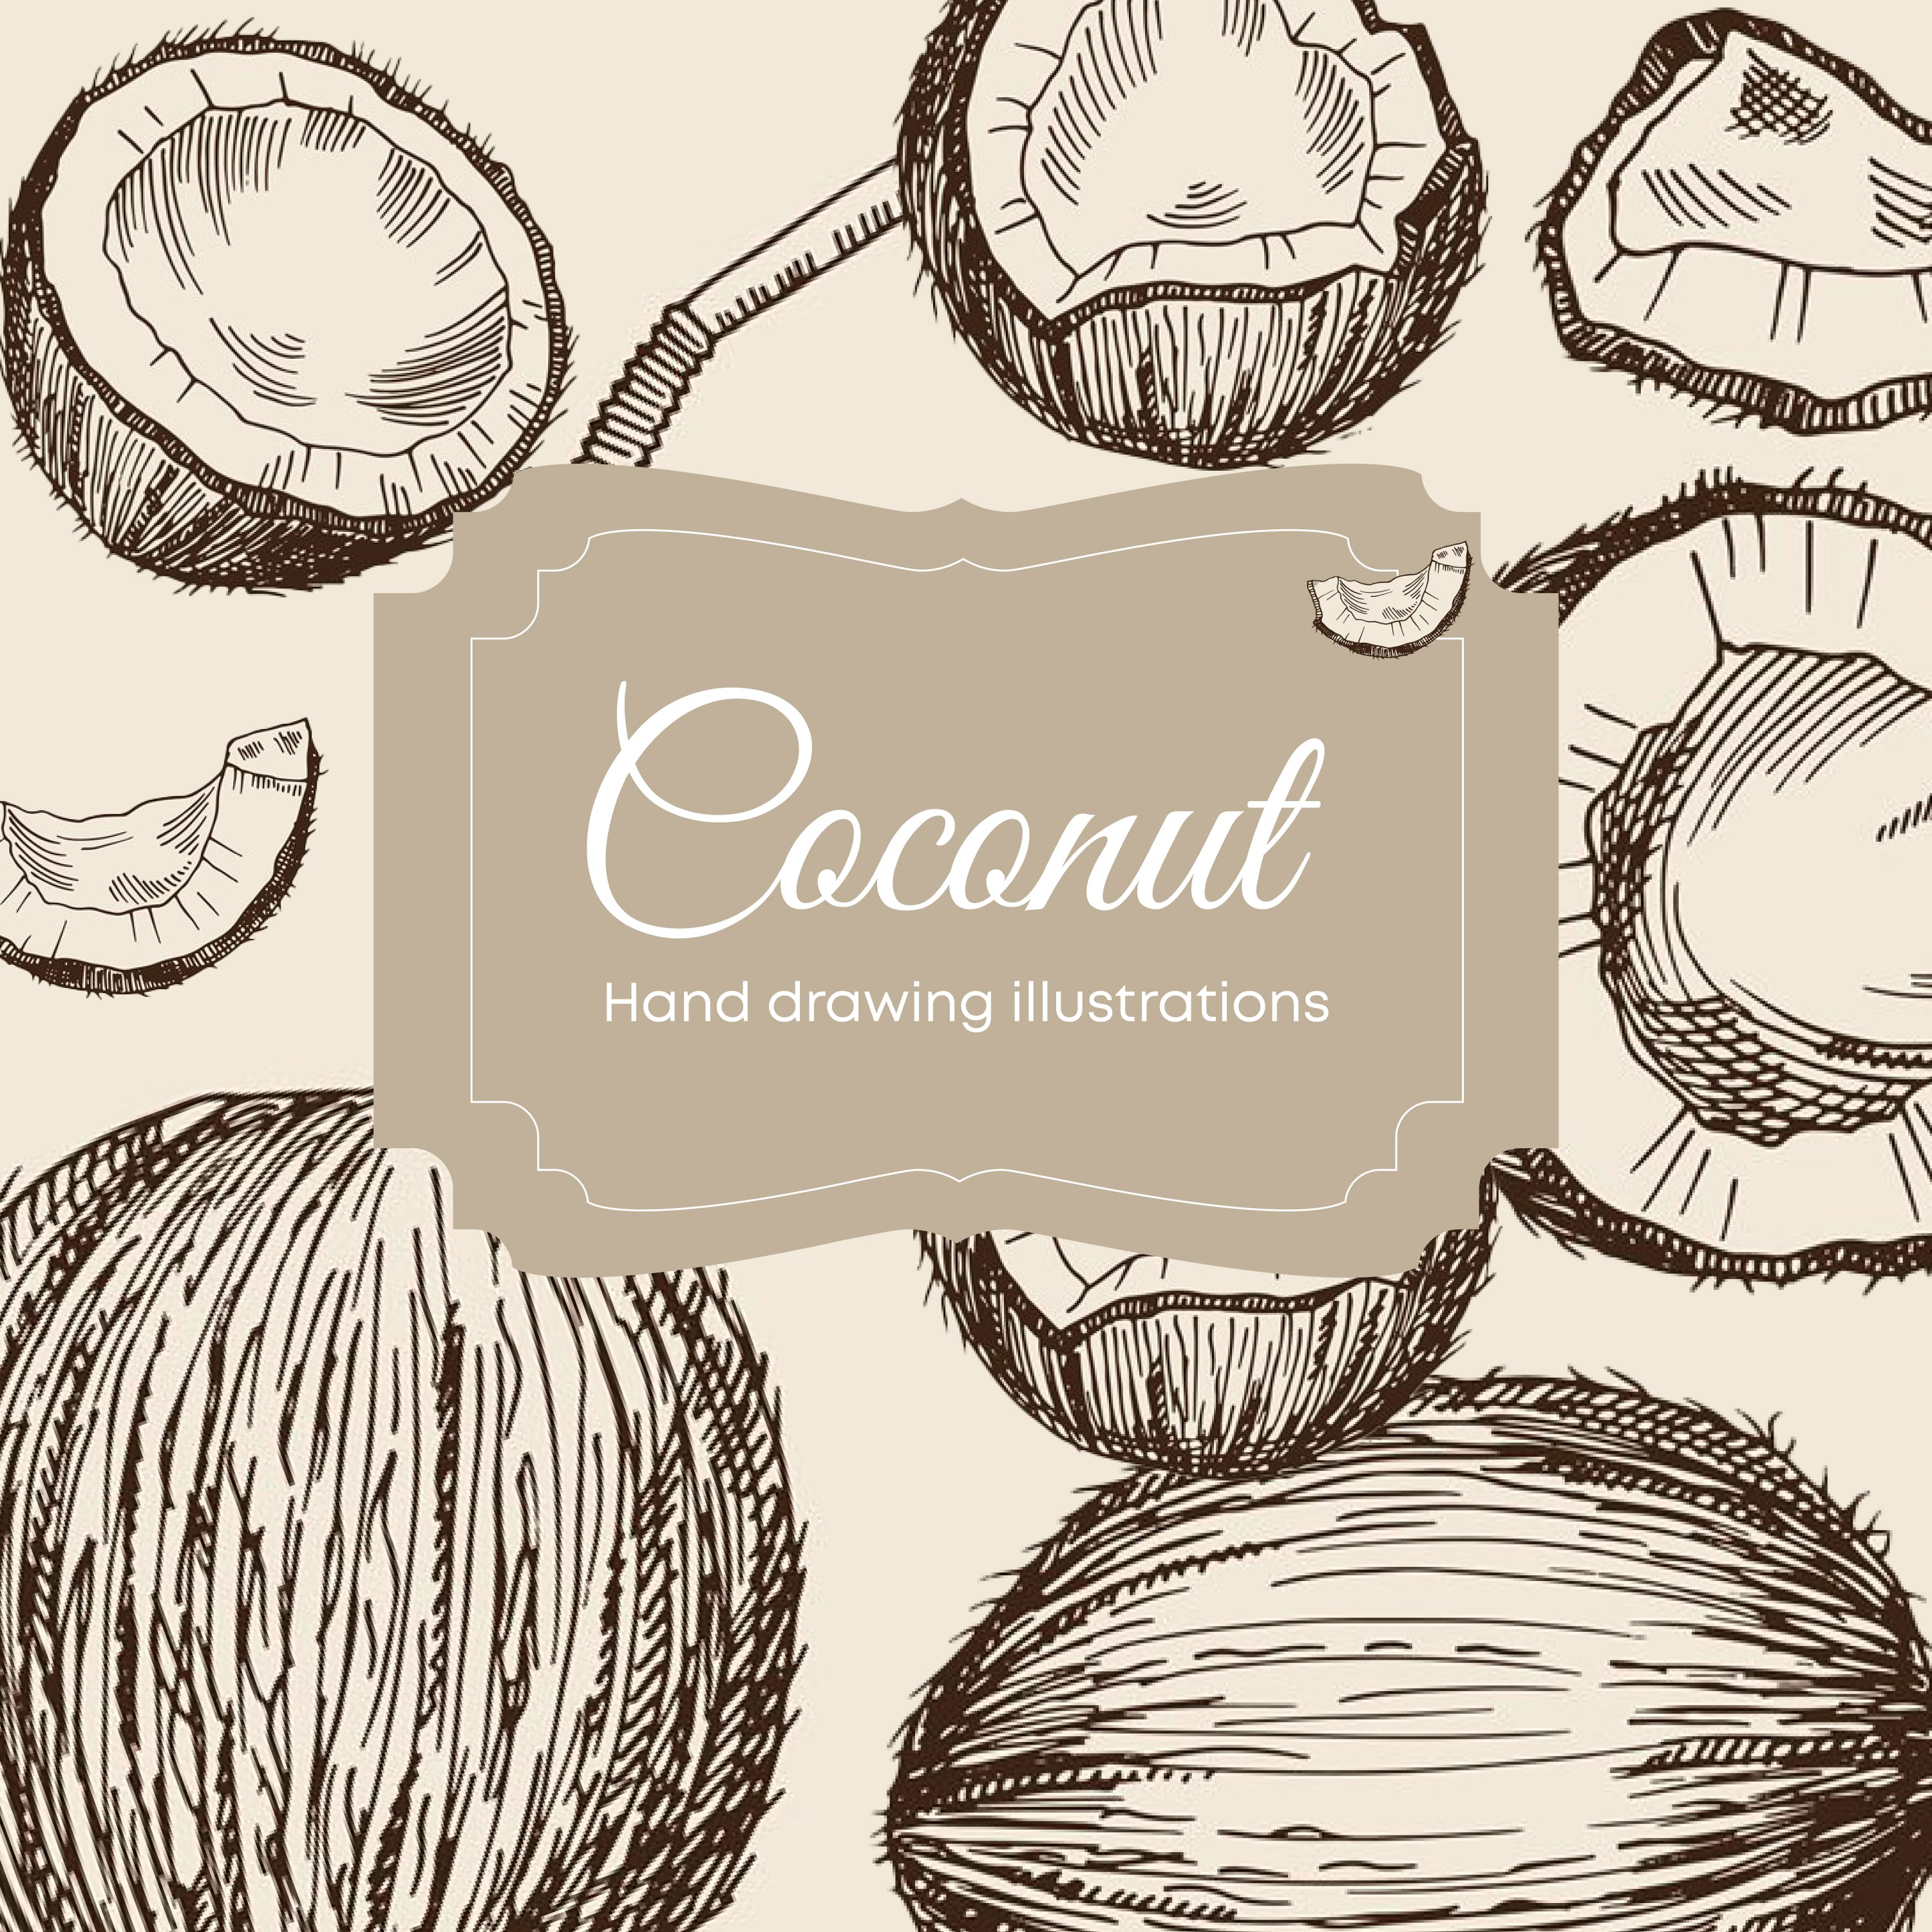 Hand drawing illustrations of different sides of coconut.